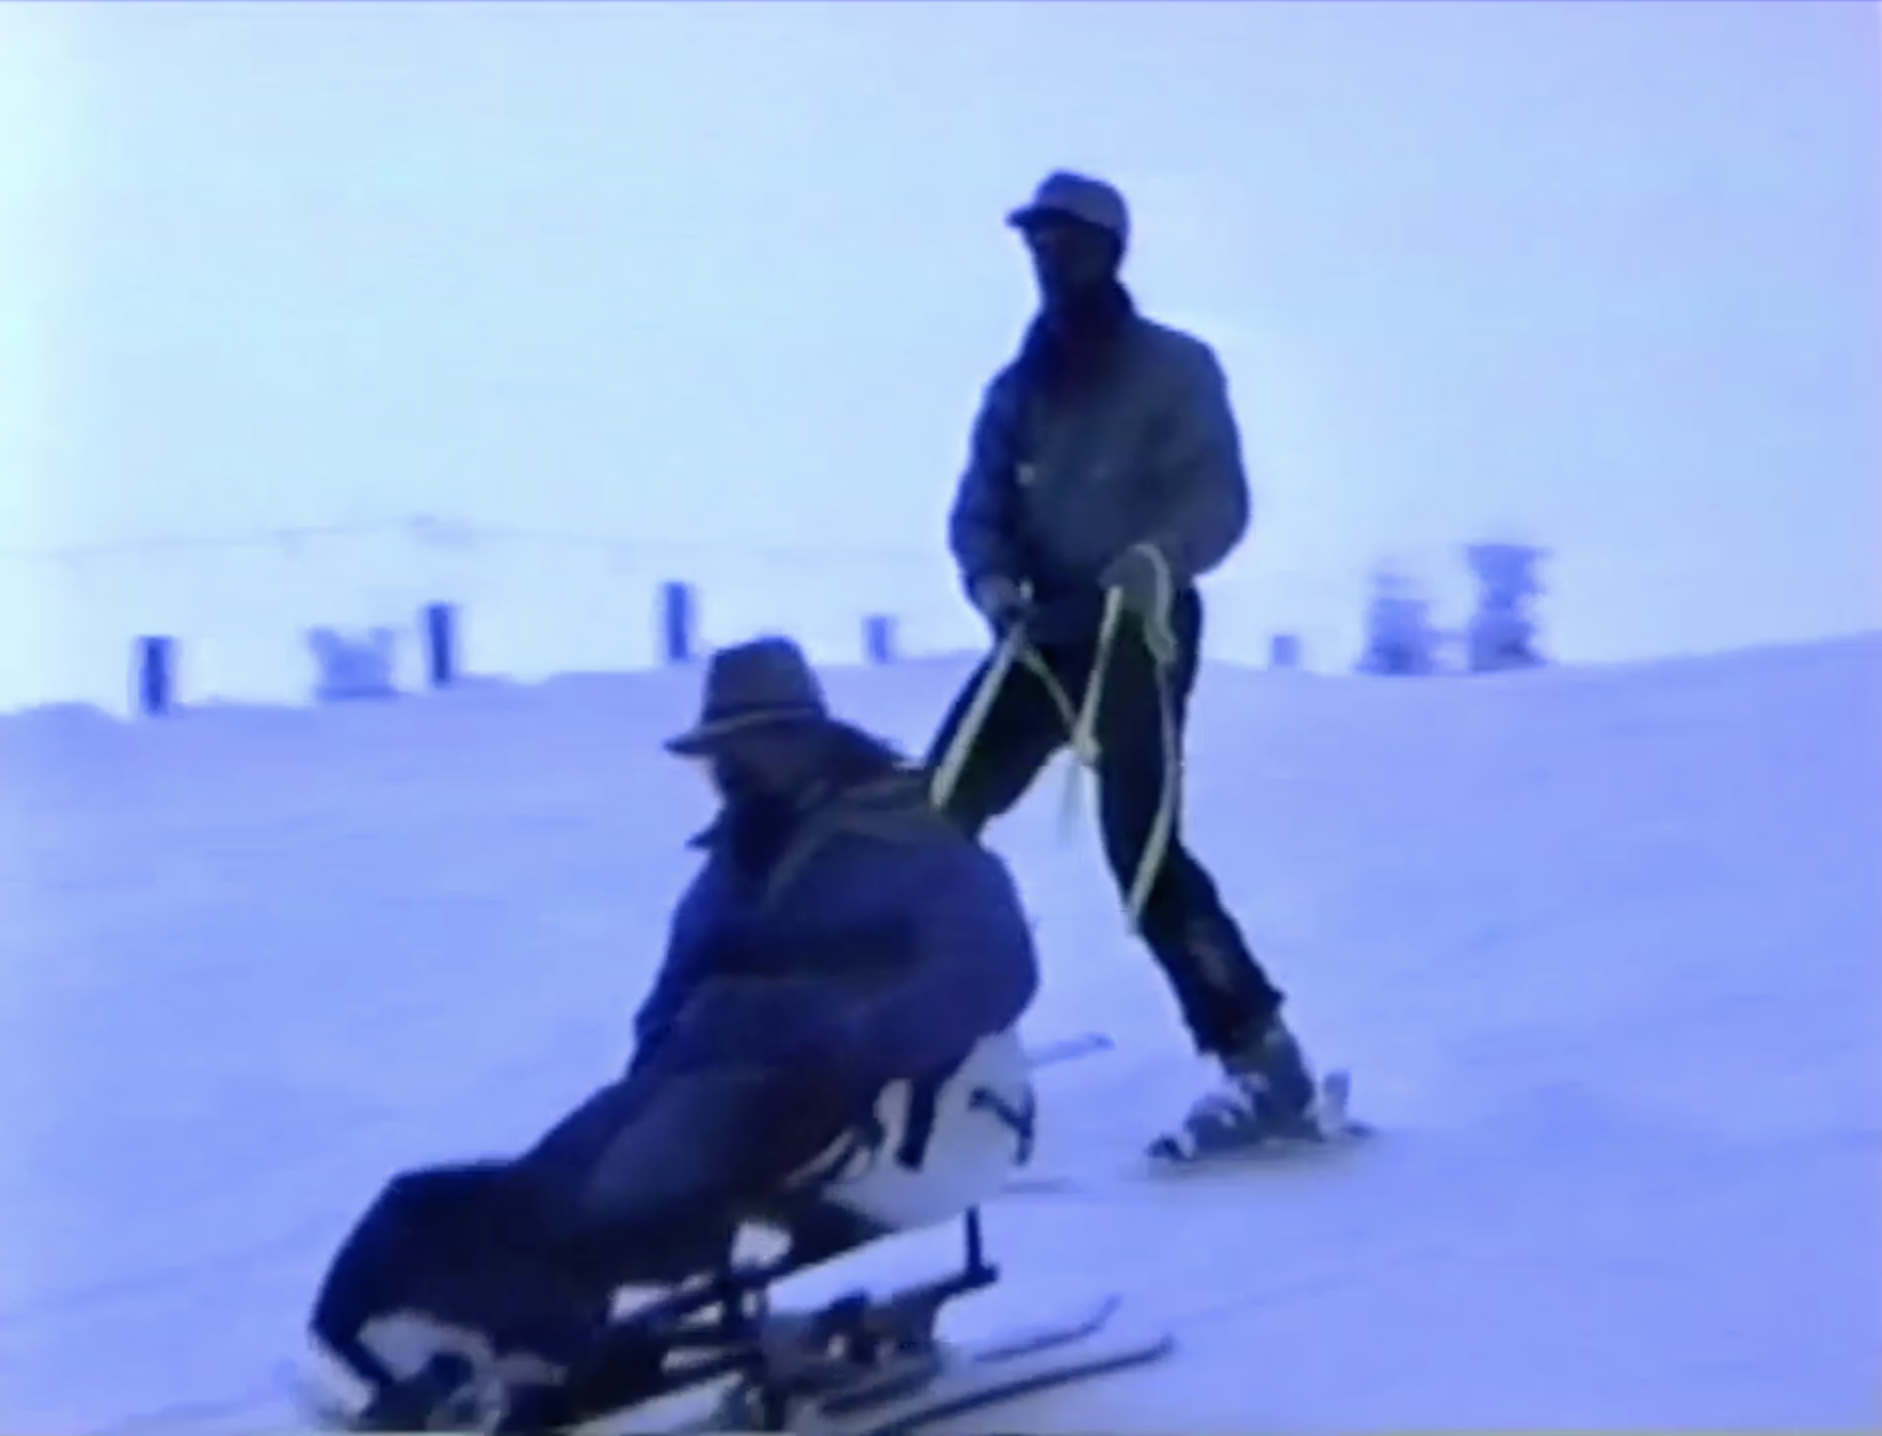 Gene being pushed in the snow on adaptive ski gear